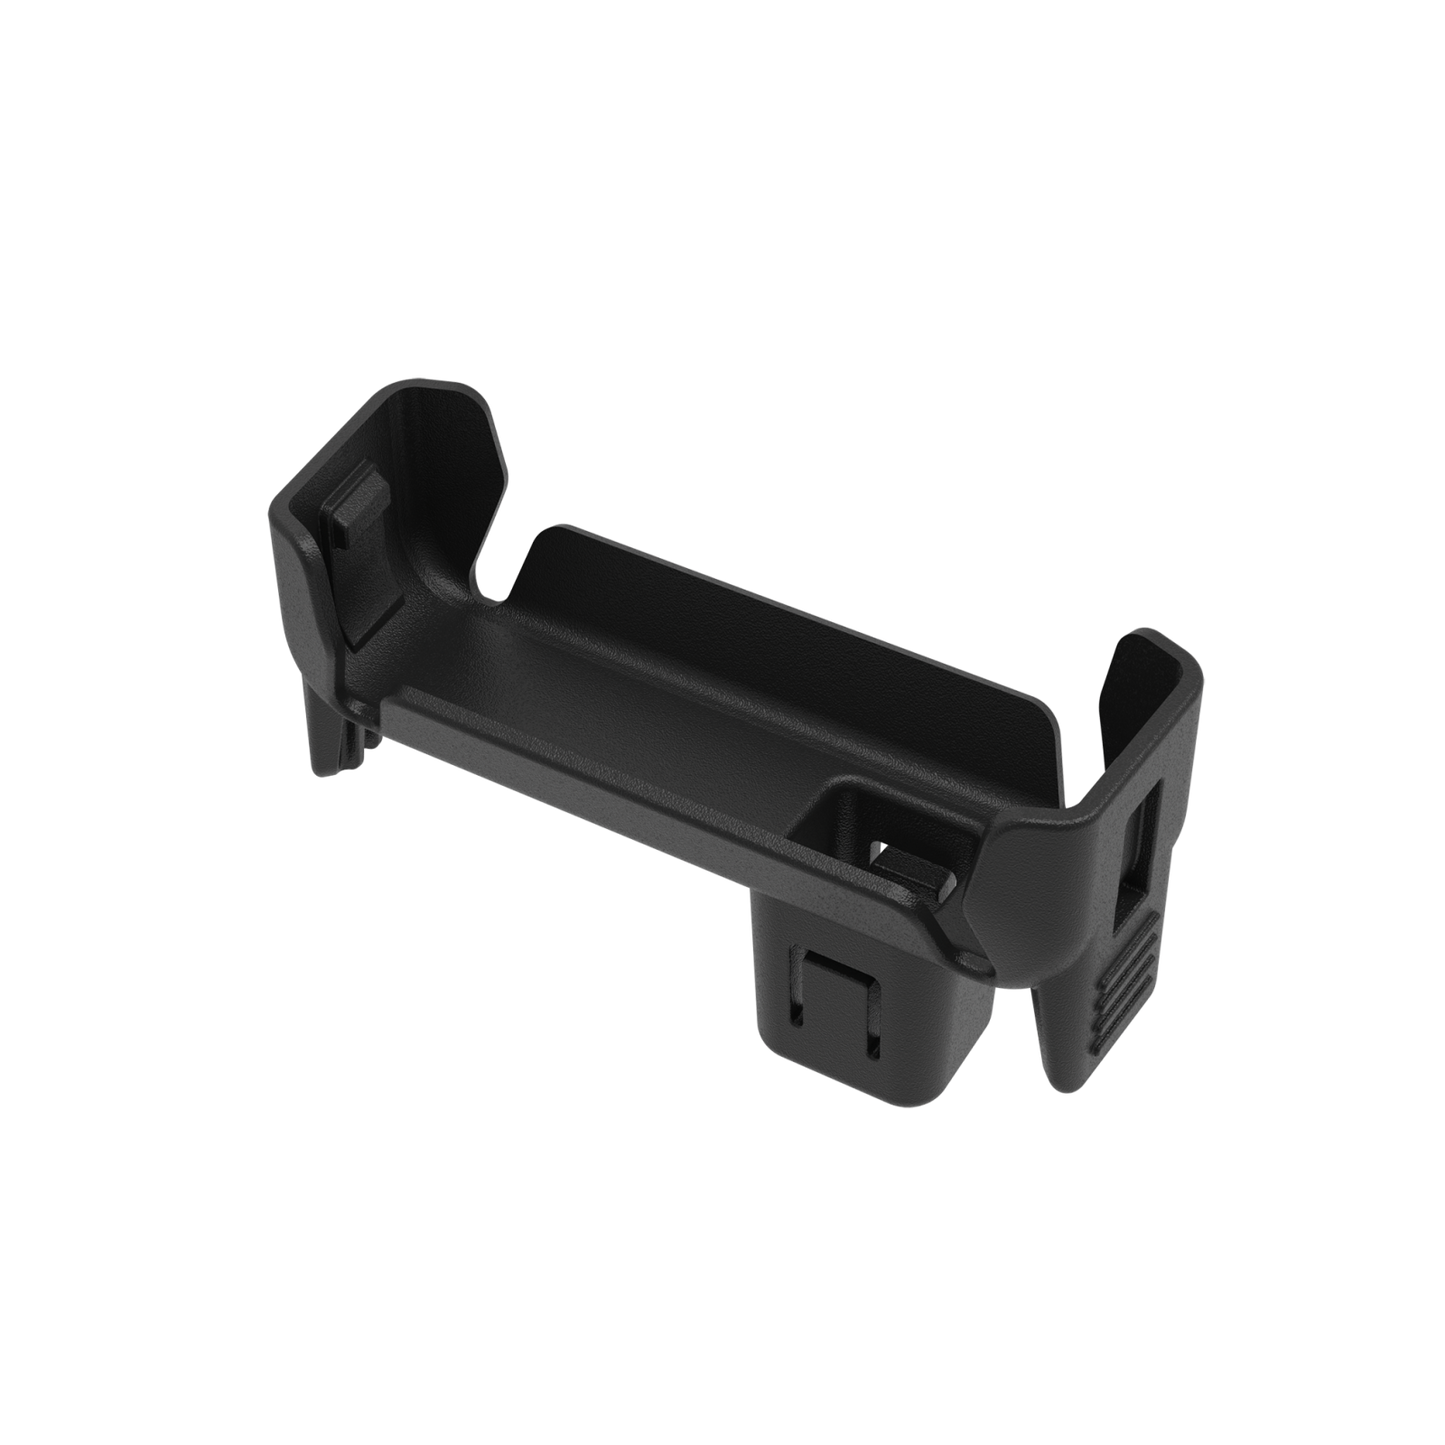 AXIS TW1901 Replacement cable holder to securely connect the TW1200 Body Worn Mini Bullet Sensor cable to the W100 Body Worn Camera 5P